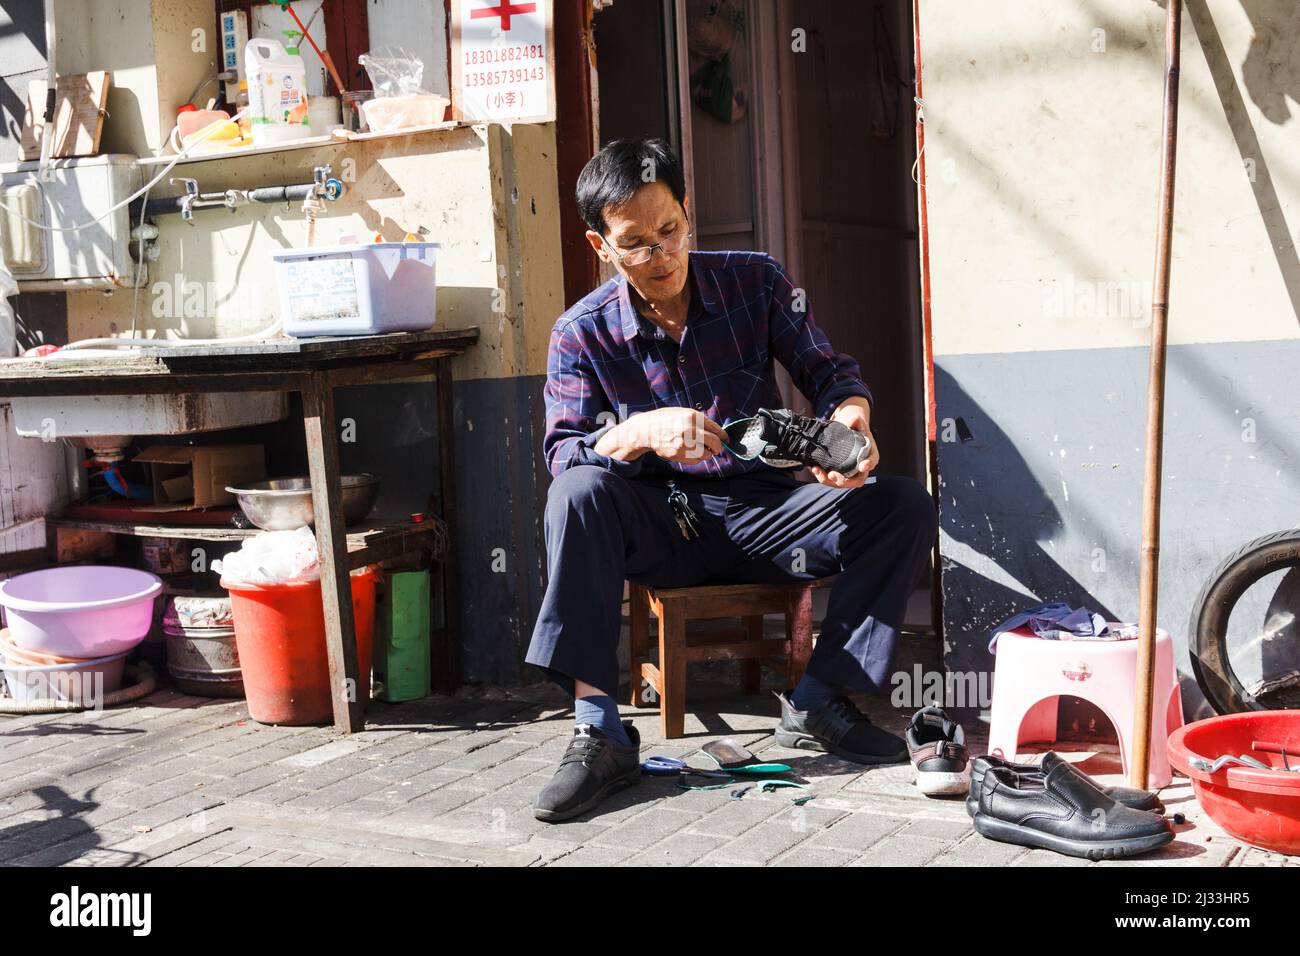 Shanghai, China- Shoe maker on street one of the oldest neighborhoods in Shanghai to be demolished Stock Photo